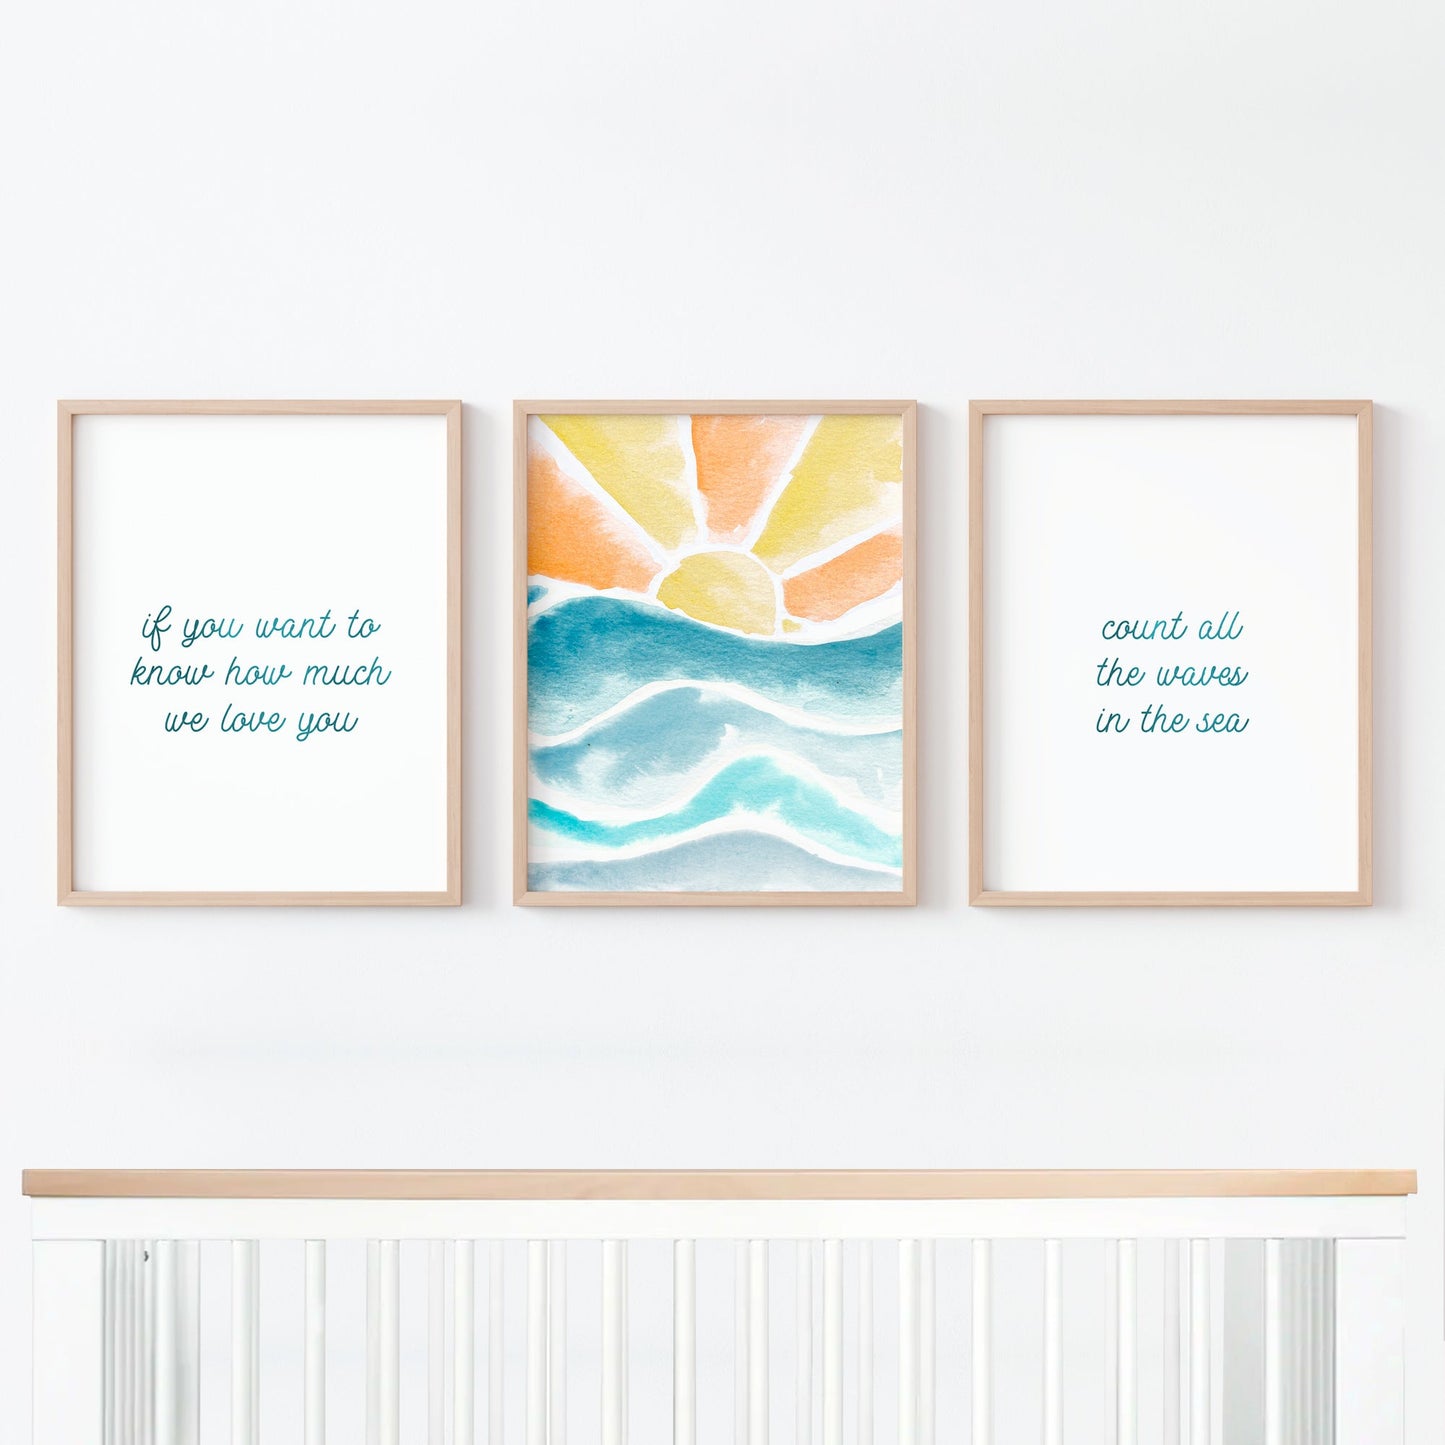 Count All The Waves 3 Print Set: Sunset on Water - Art Prints - Moon Rock Prints